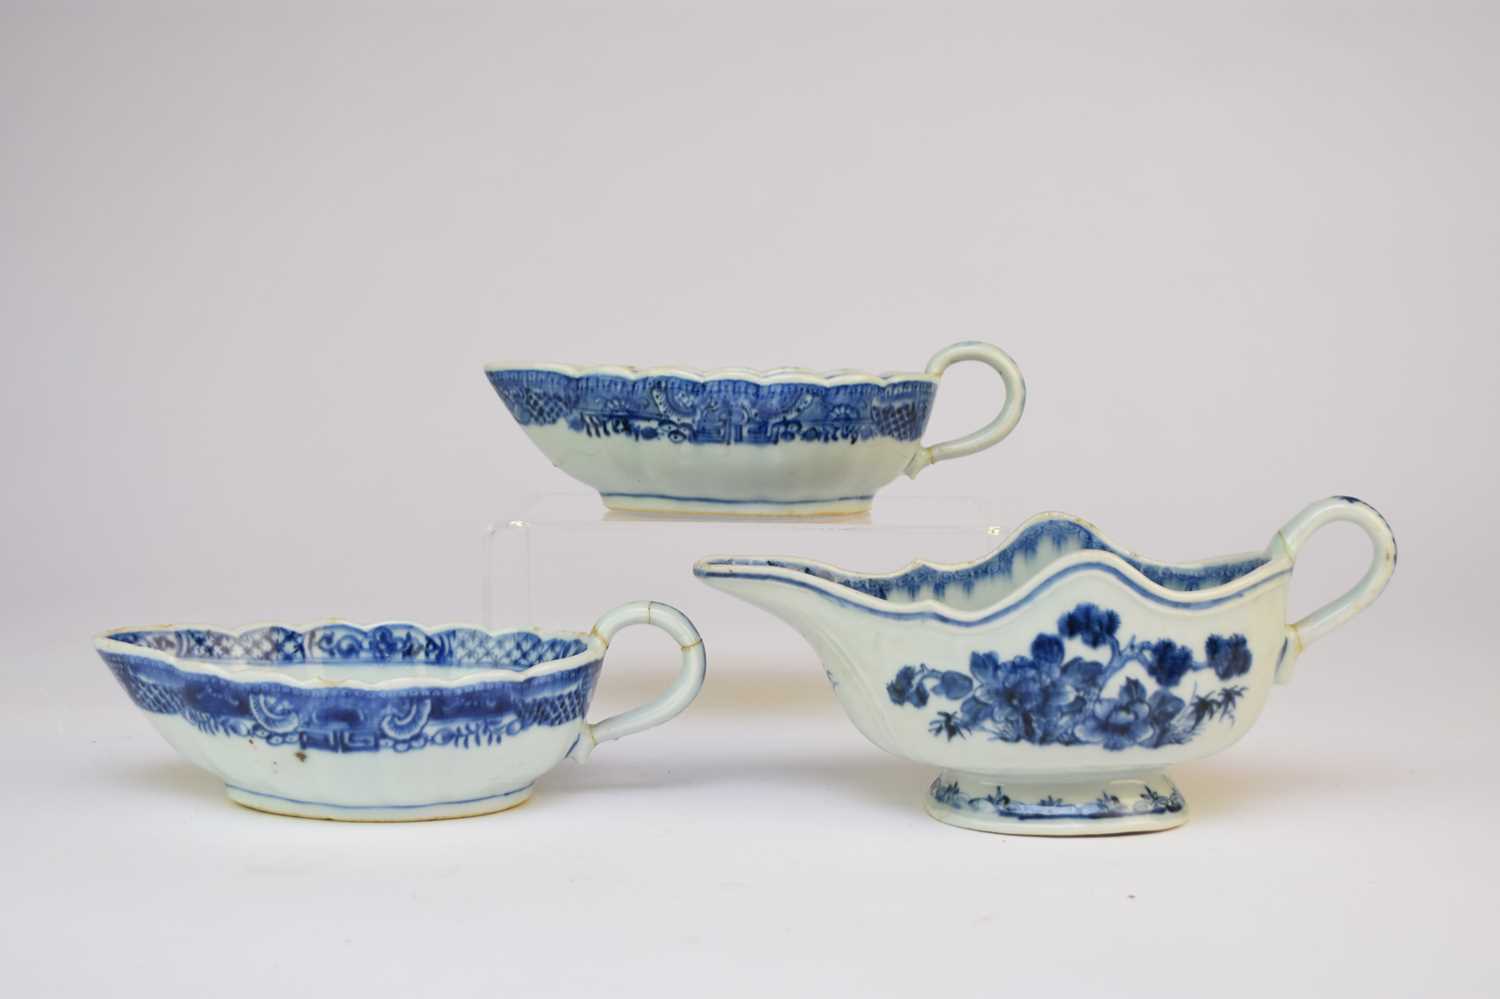 Three Chinese blue and white sauce boats, 18th century - Image 3 of 3